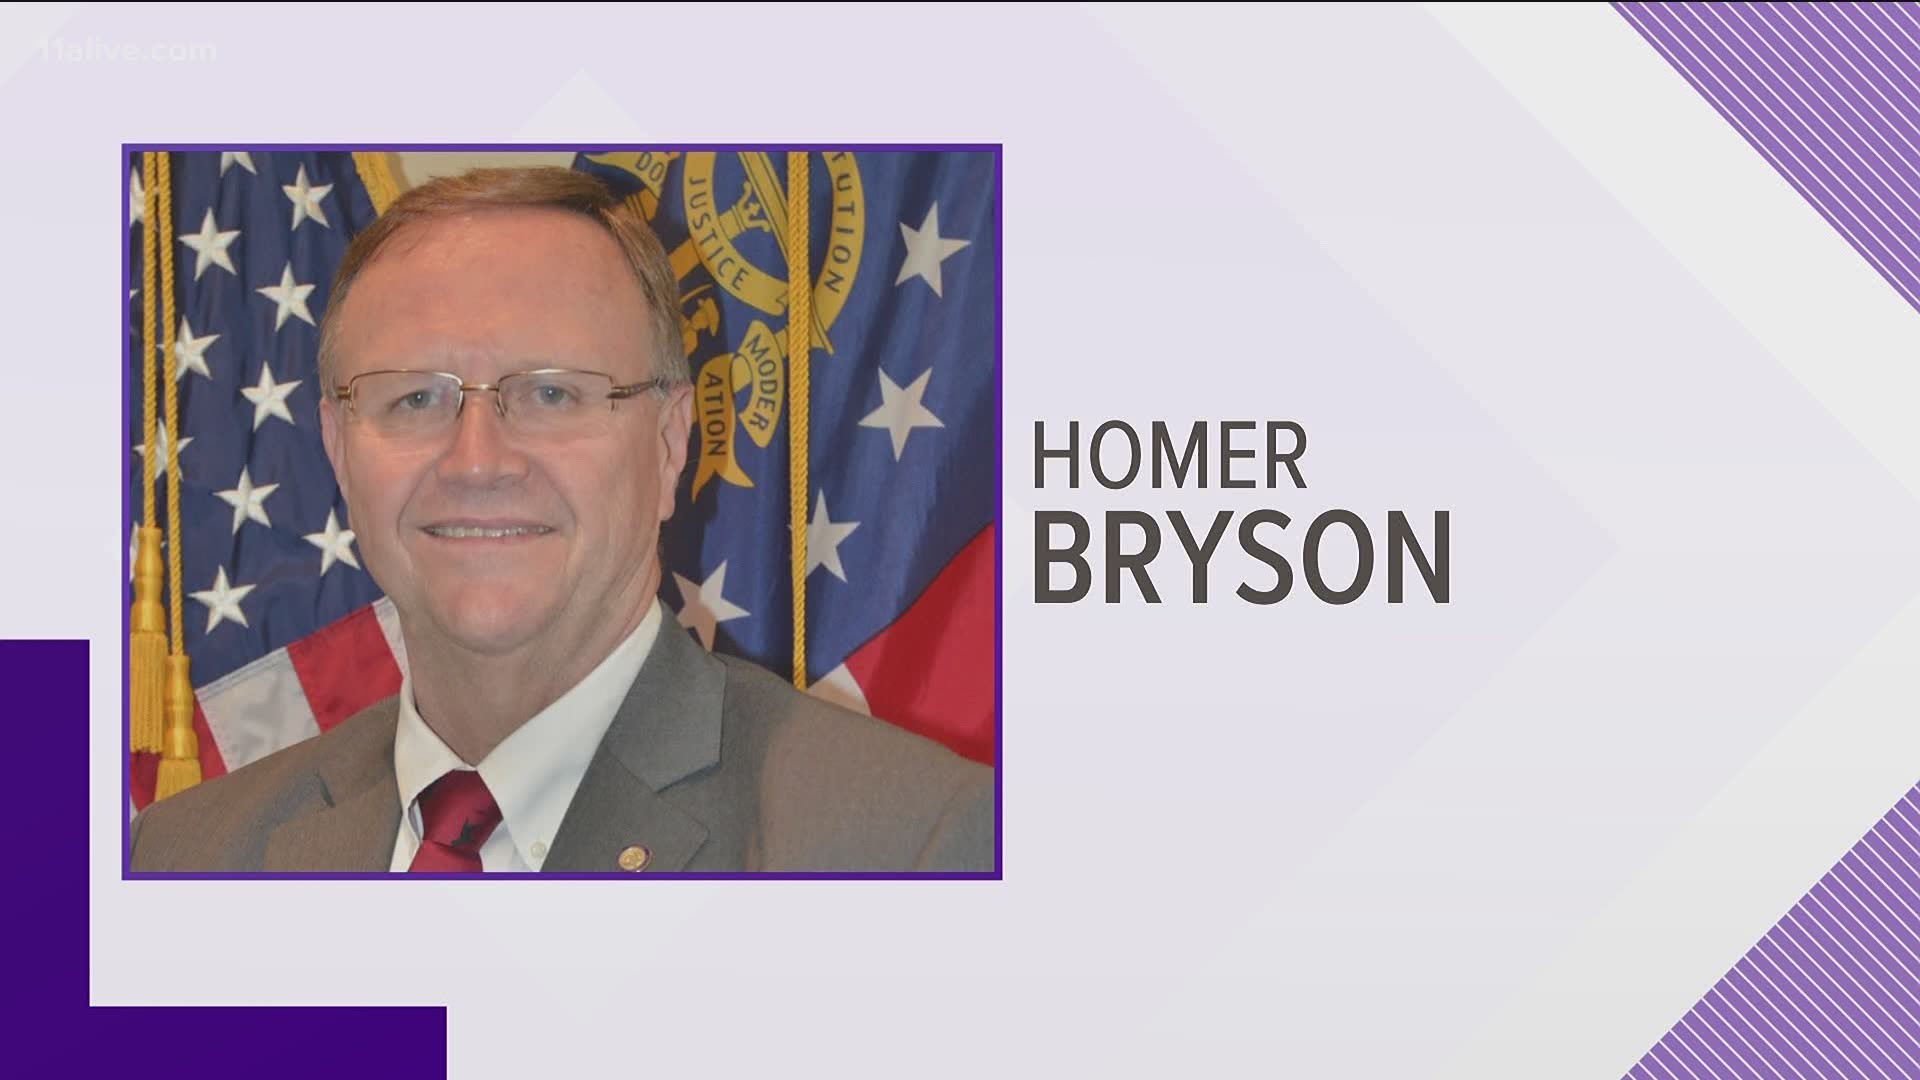 Governor Brian Kemp announced that Georgia Emergency Management Agency director Homer Bryson is retiring.